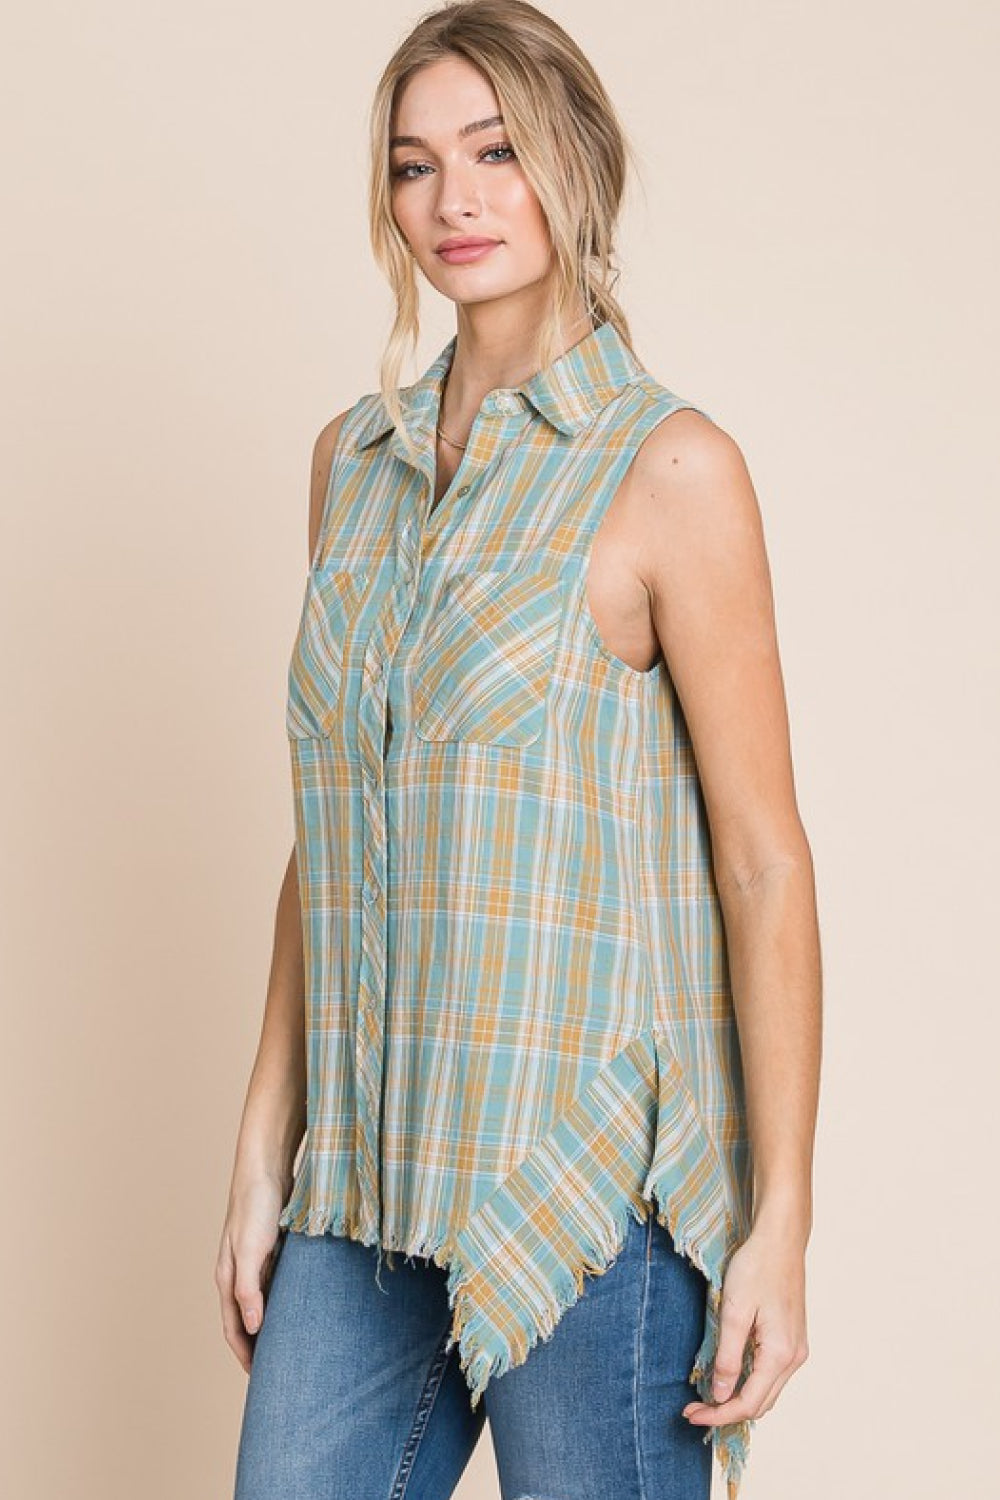 Days Gone By Sleeveless Frayed Plaid Button-Up Shirt